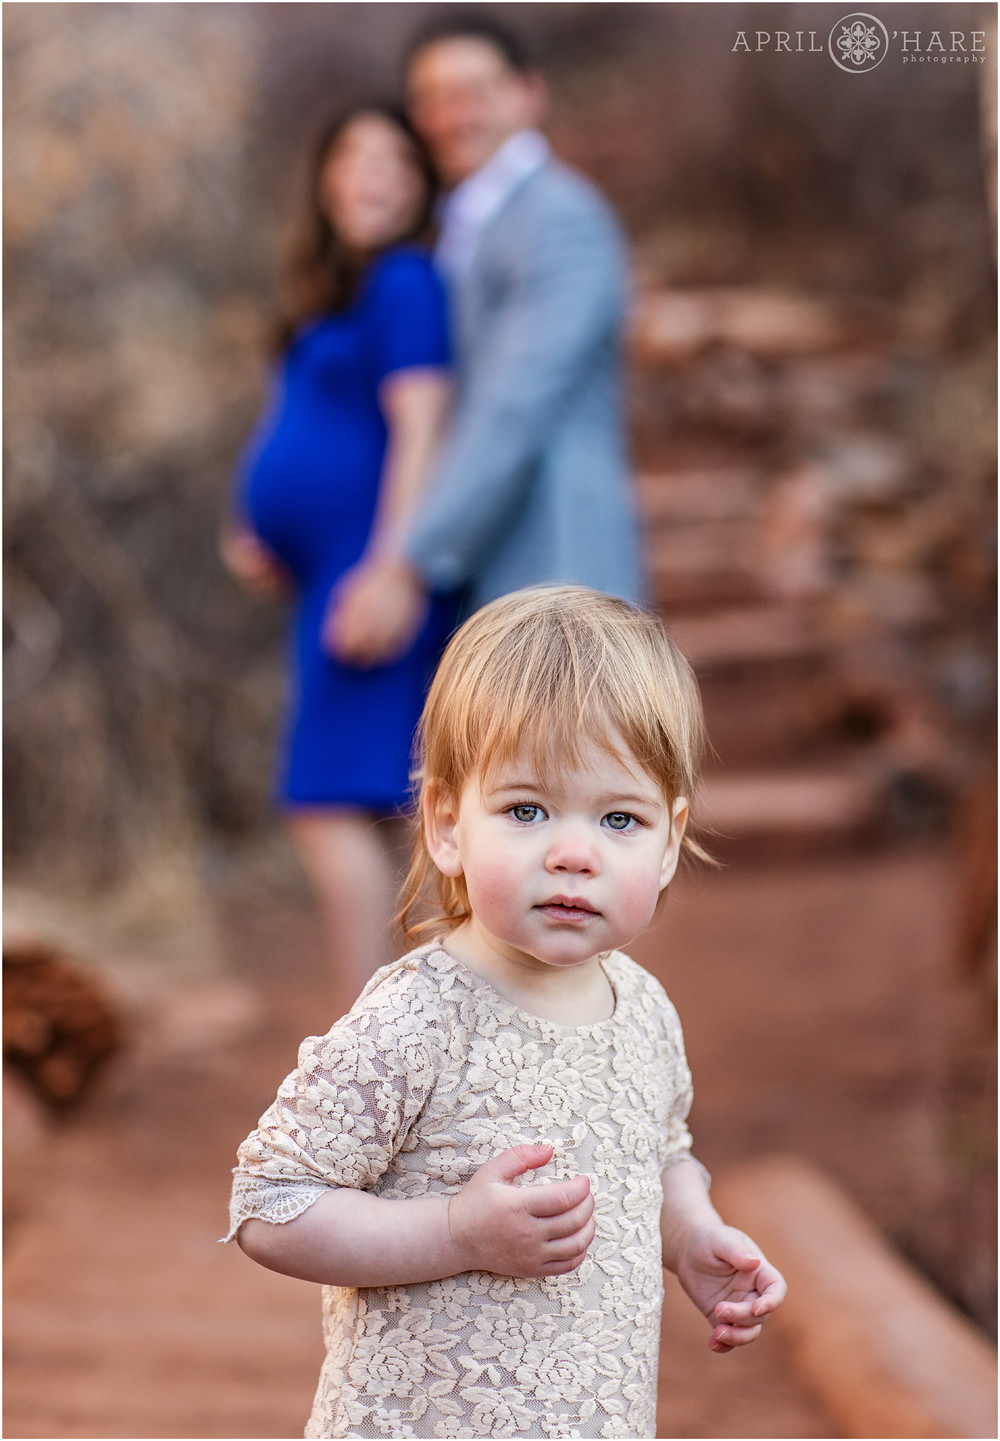 Cute little Girl wearing a light pink lace dress in the foreground with her pregnant mama and dad in the backdrop at Red Rocks Trading Post Trail in Colorado